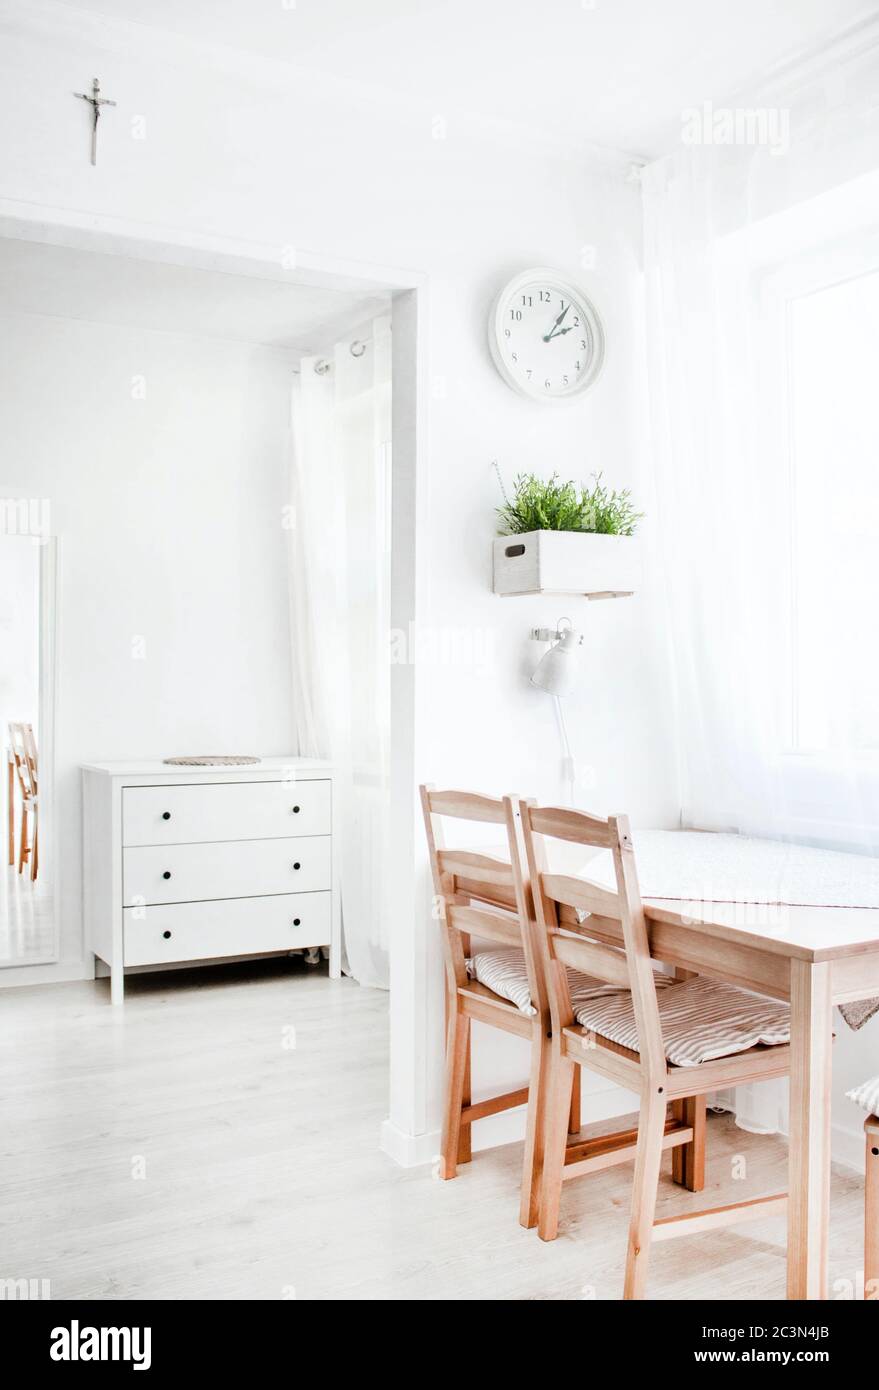 Vertical shot of a white interior with wooden elements Stock Photo